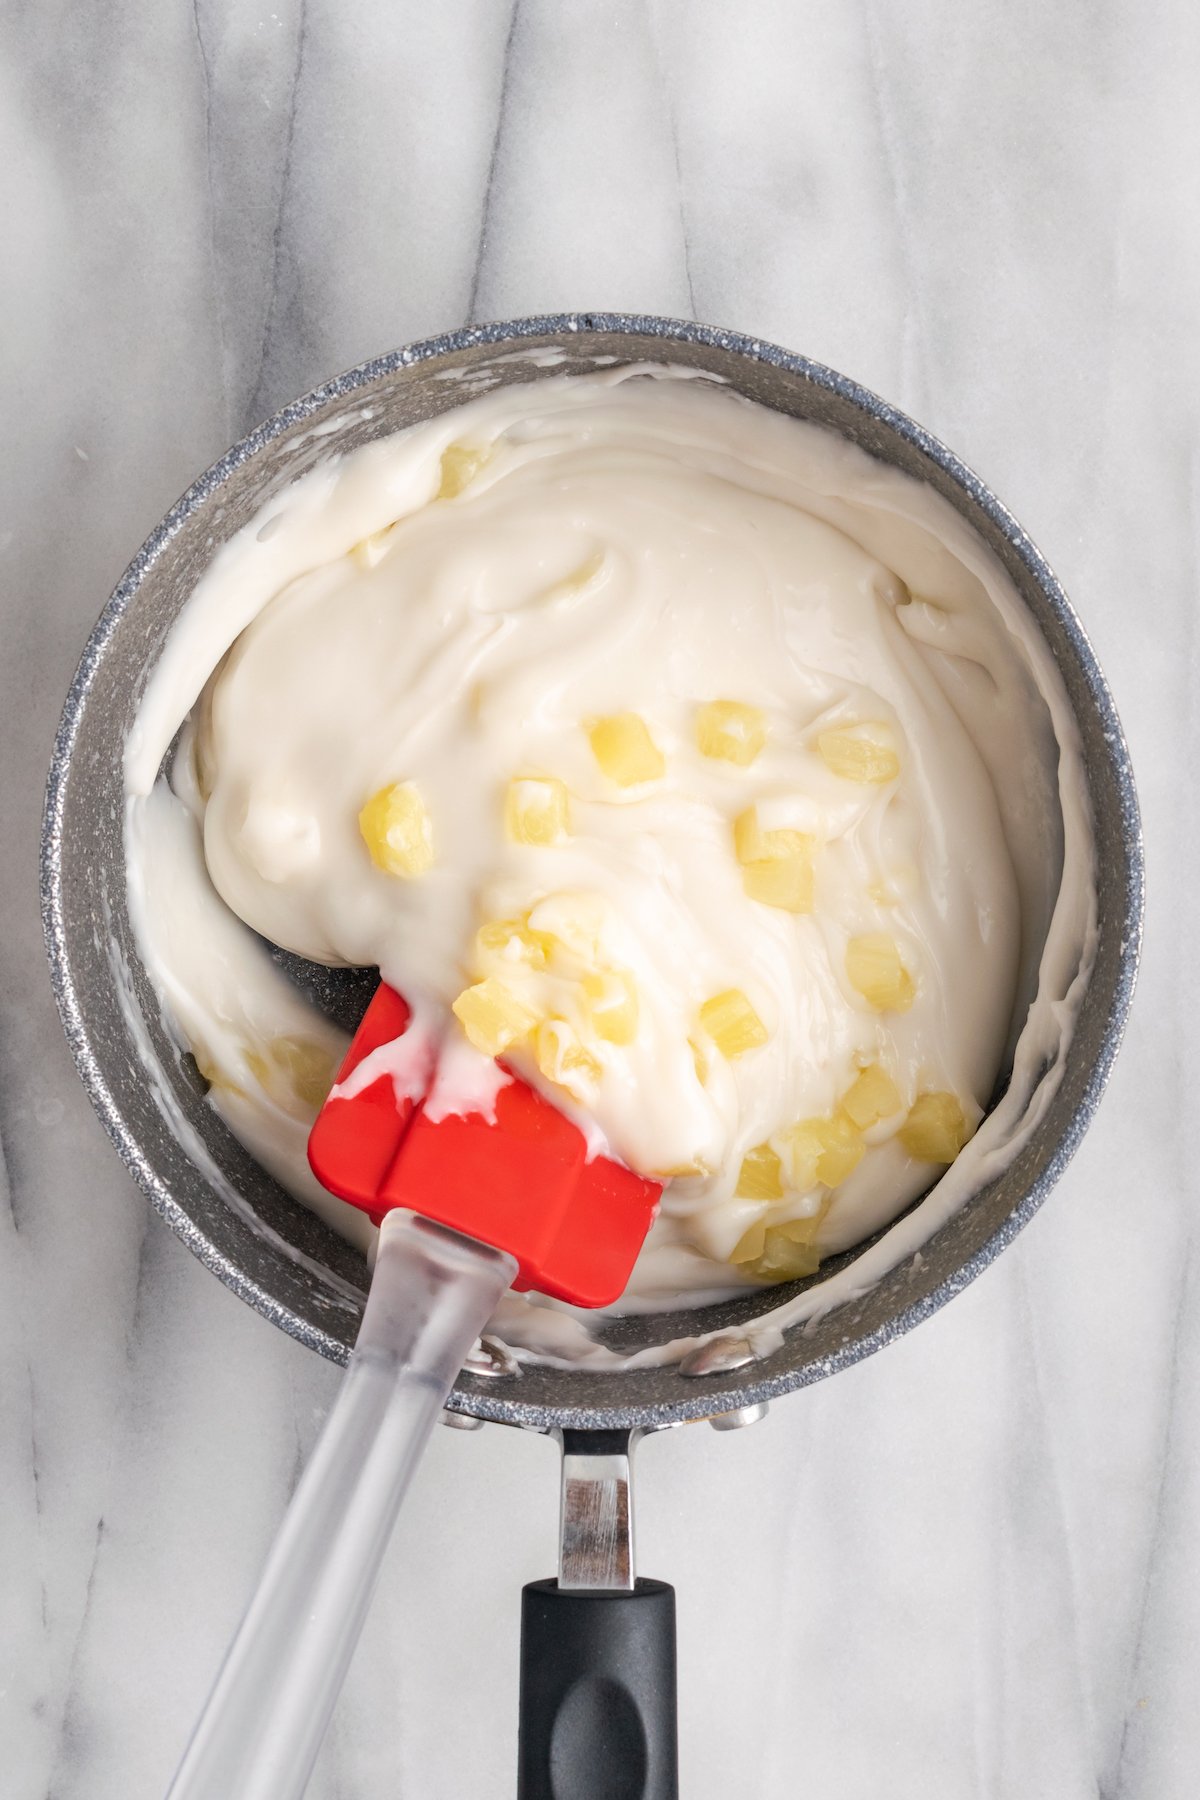 Stirring pineapple into haupia with rubber spatula